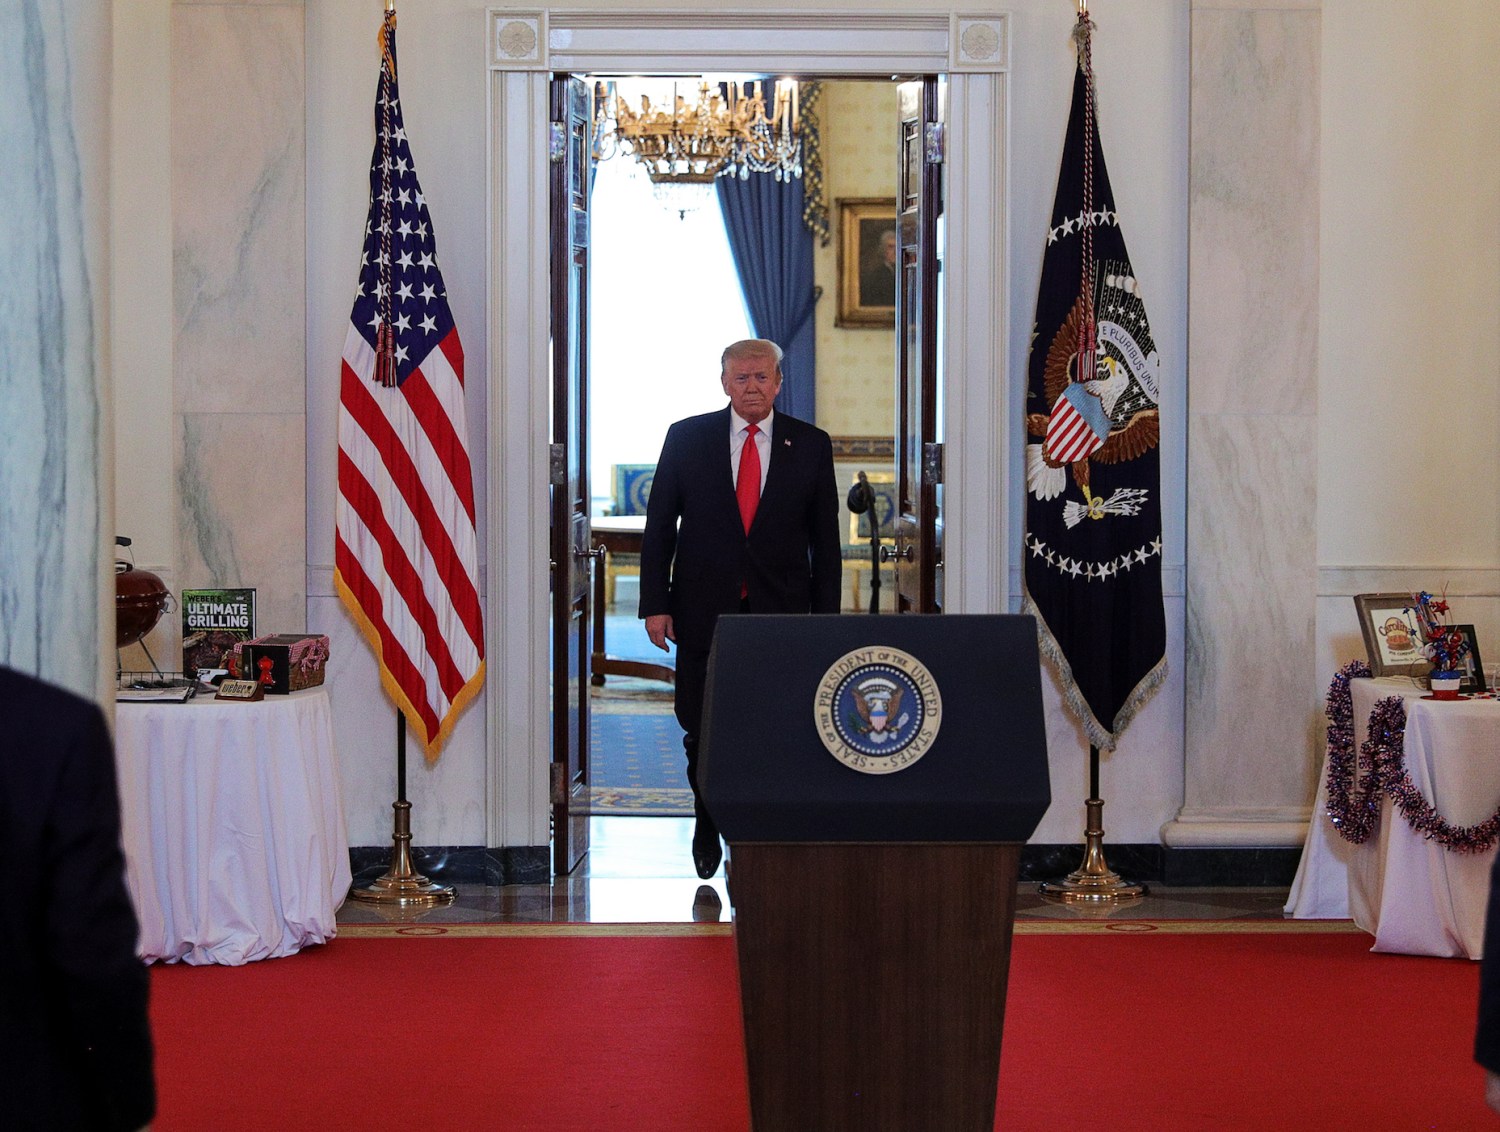 U.S. President Donald Trump arrives for a "Spirit of America Showcase" event in the Cross Hall of the White House in Washington, U.S., July 2, 2020. REUTERS/Tom Brenner